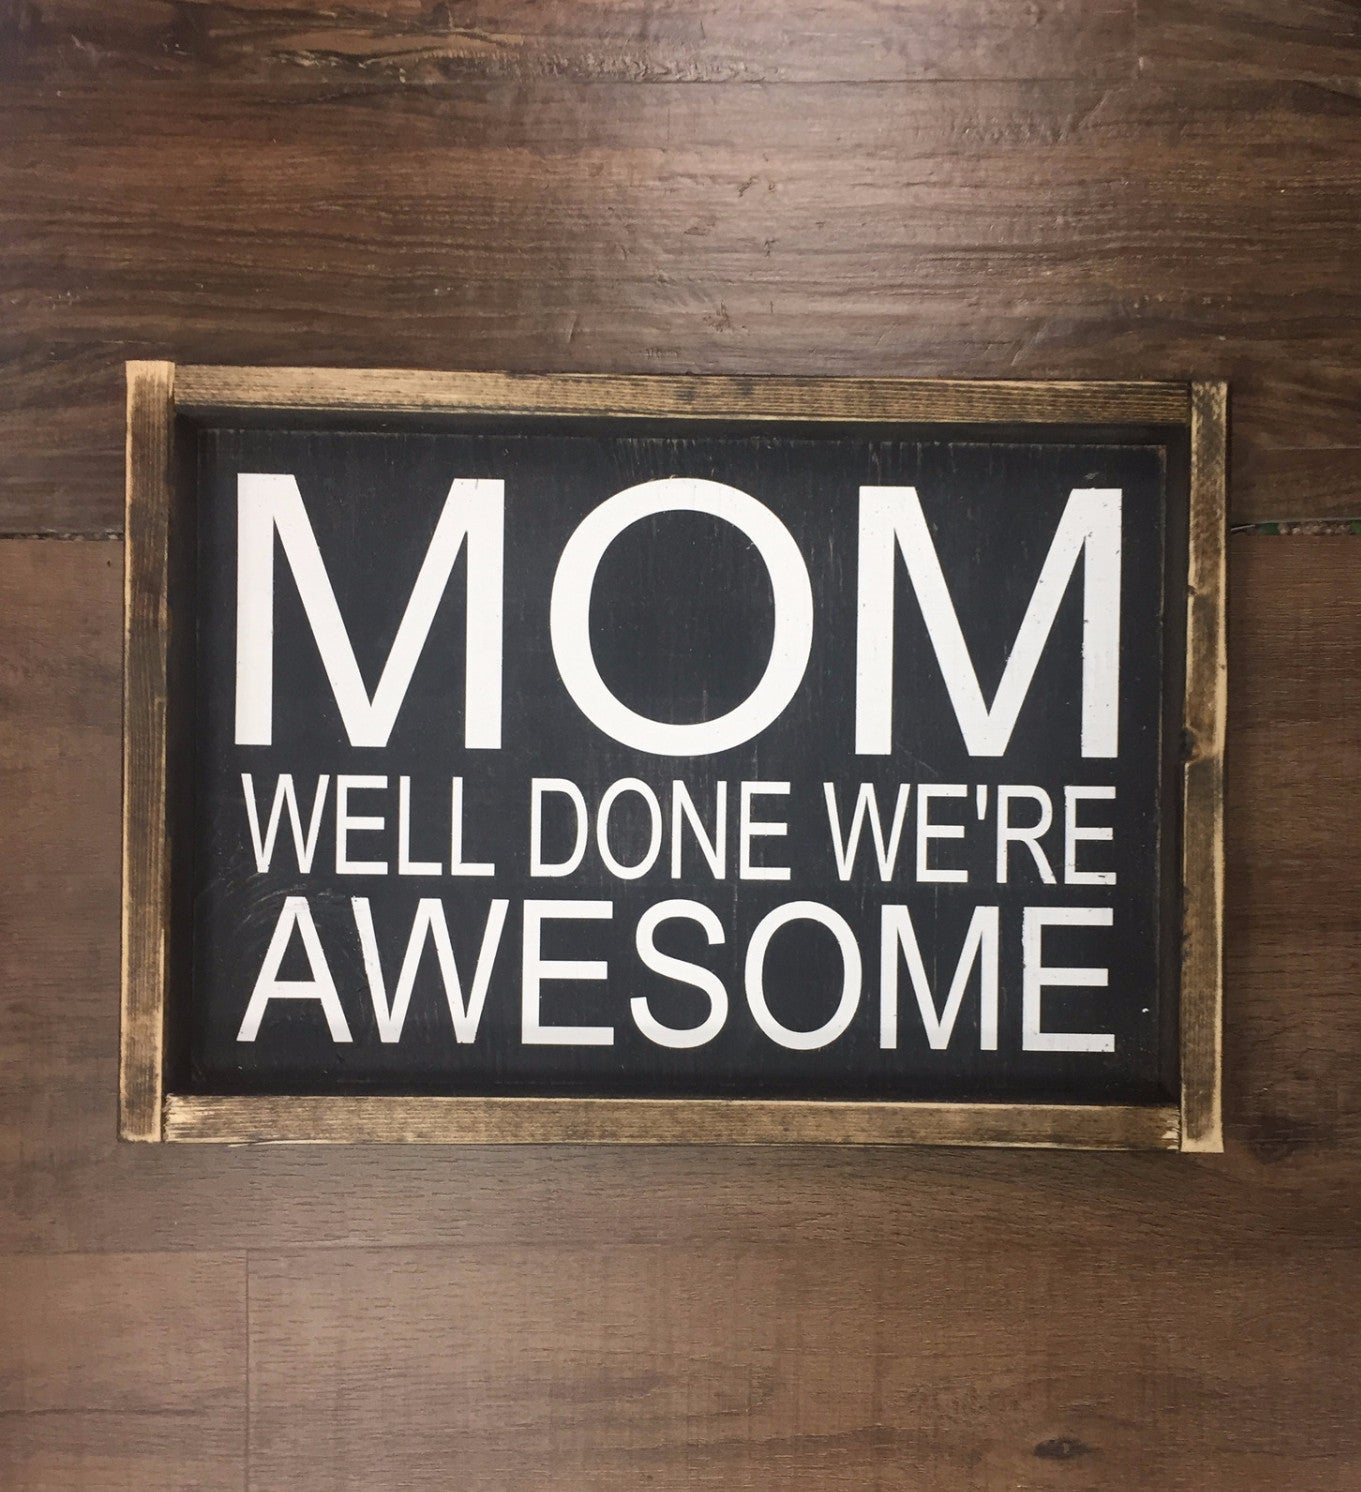 Mom Well Done We're Awesome – JaxnBlvd